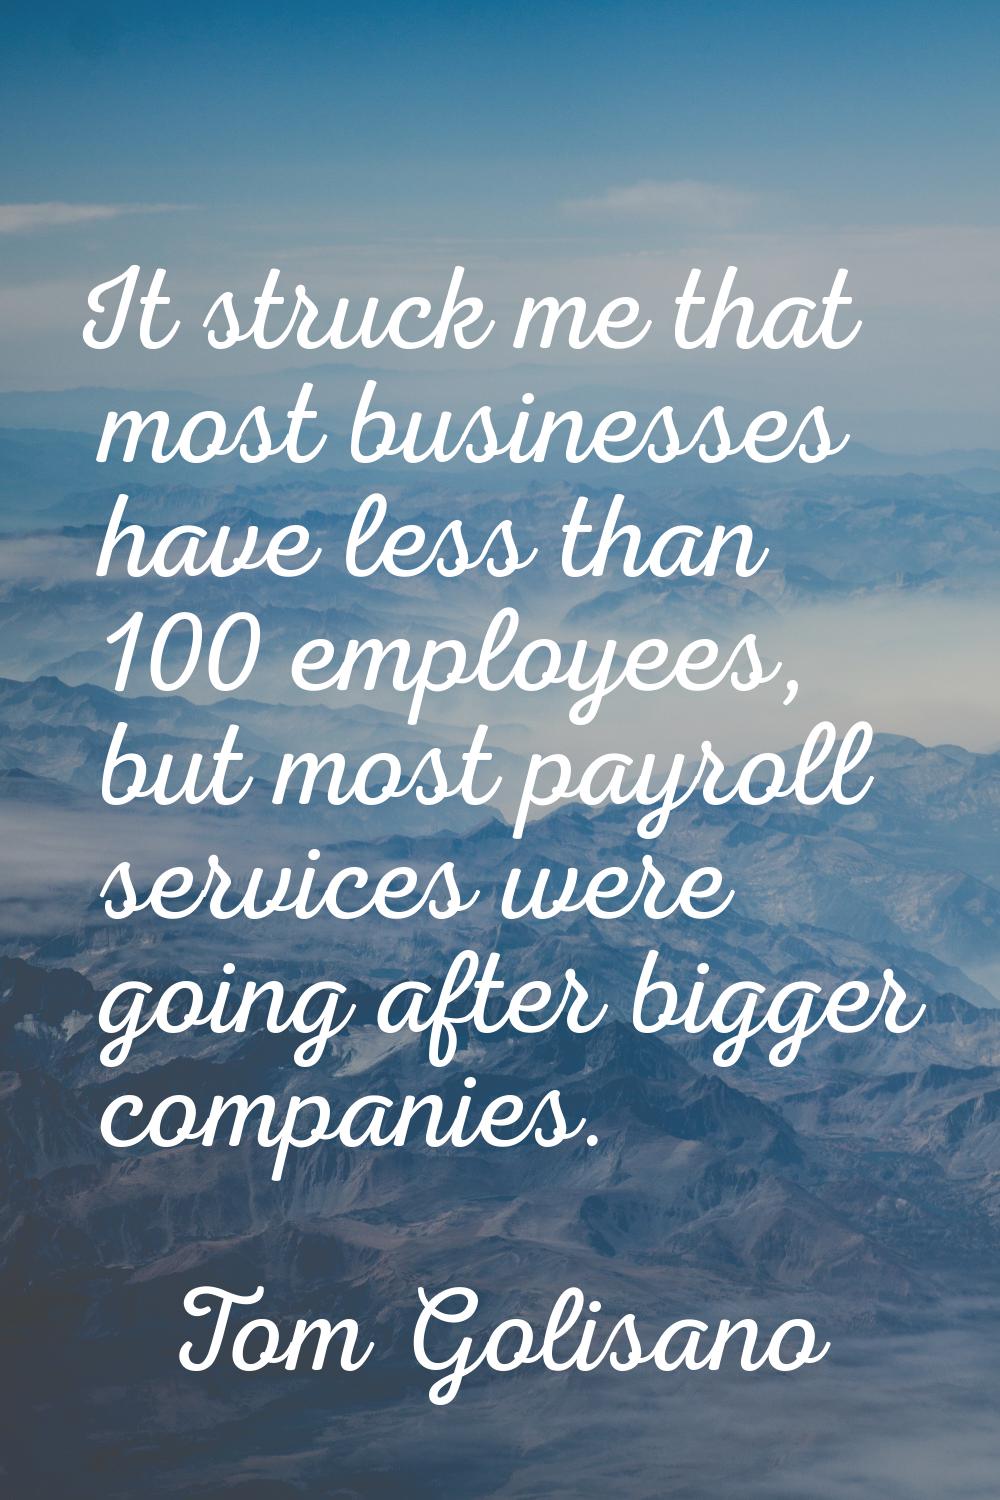 It struck me that most businesses have less than 100 employees, but most payroll services were goin